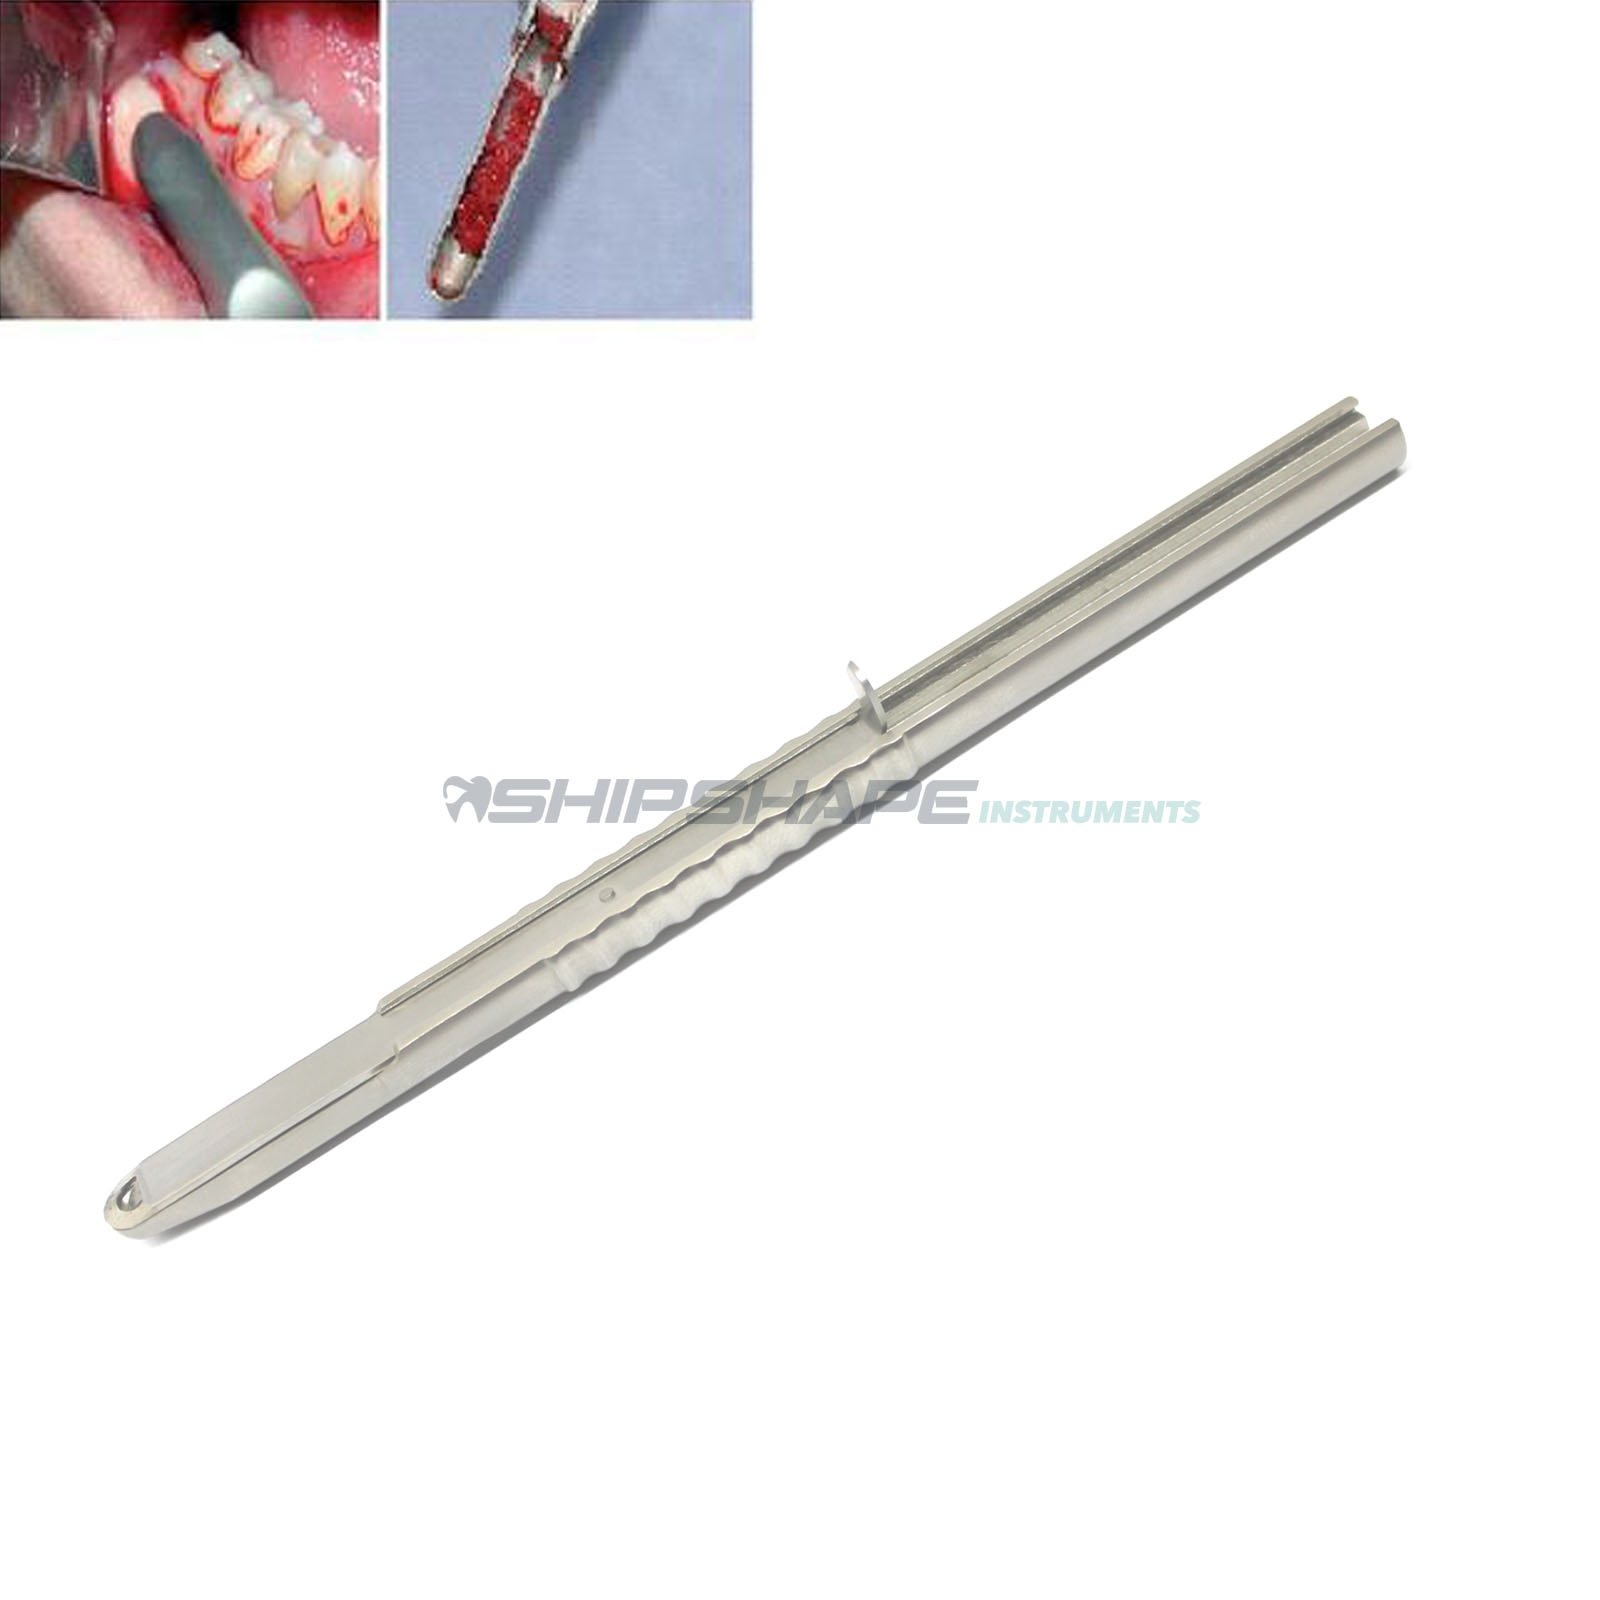 Dental Implant Bone Scraper Straight Grafting Bone Surgery Instrument Stainless Steel Tool Surgical Collector-1236